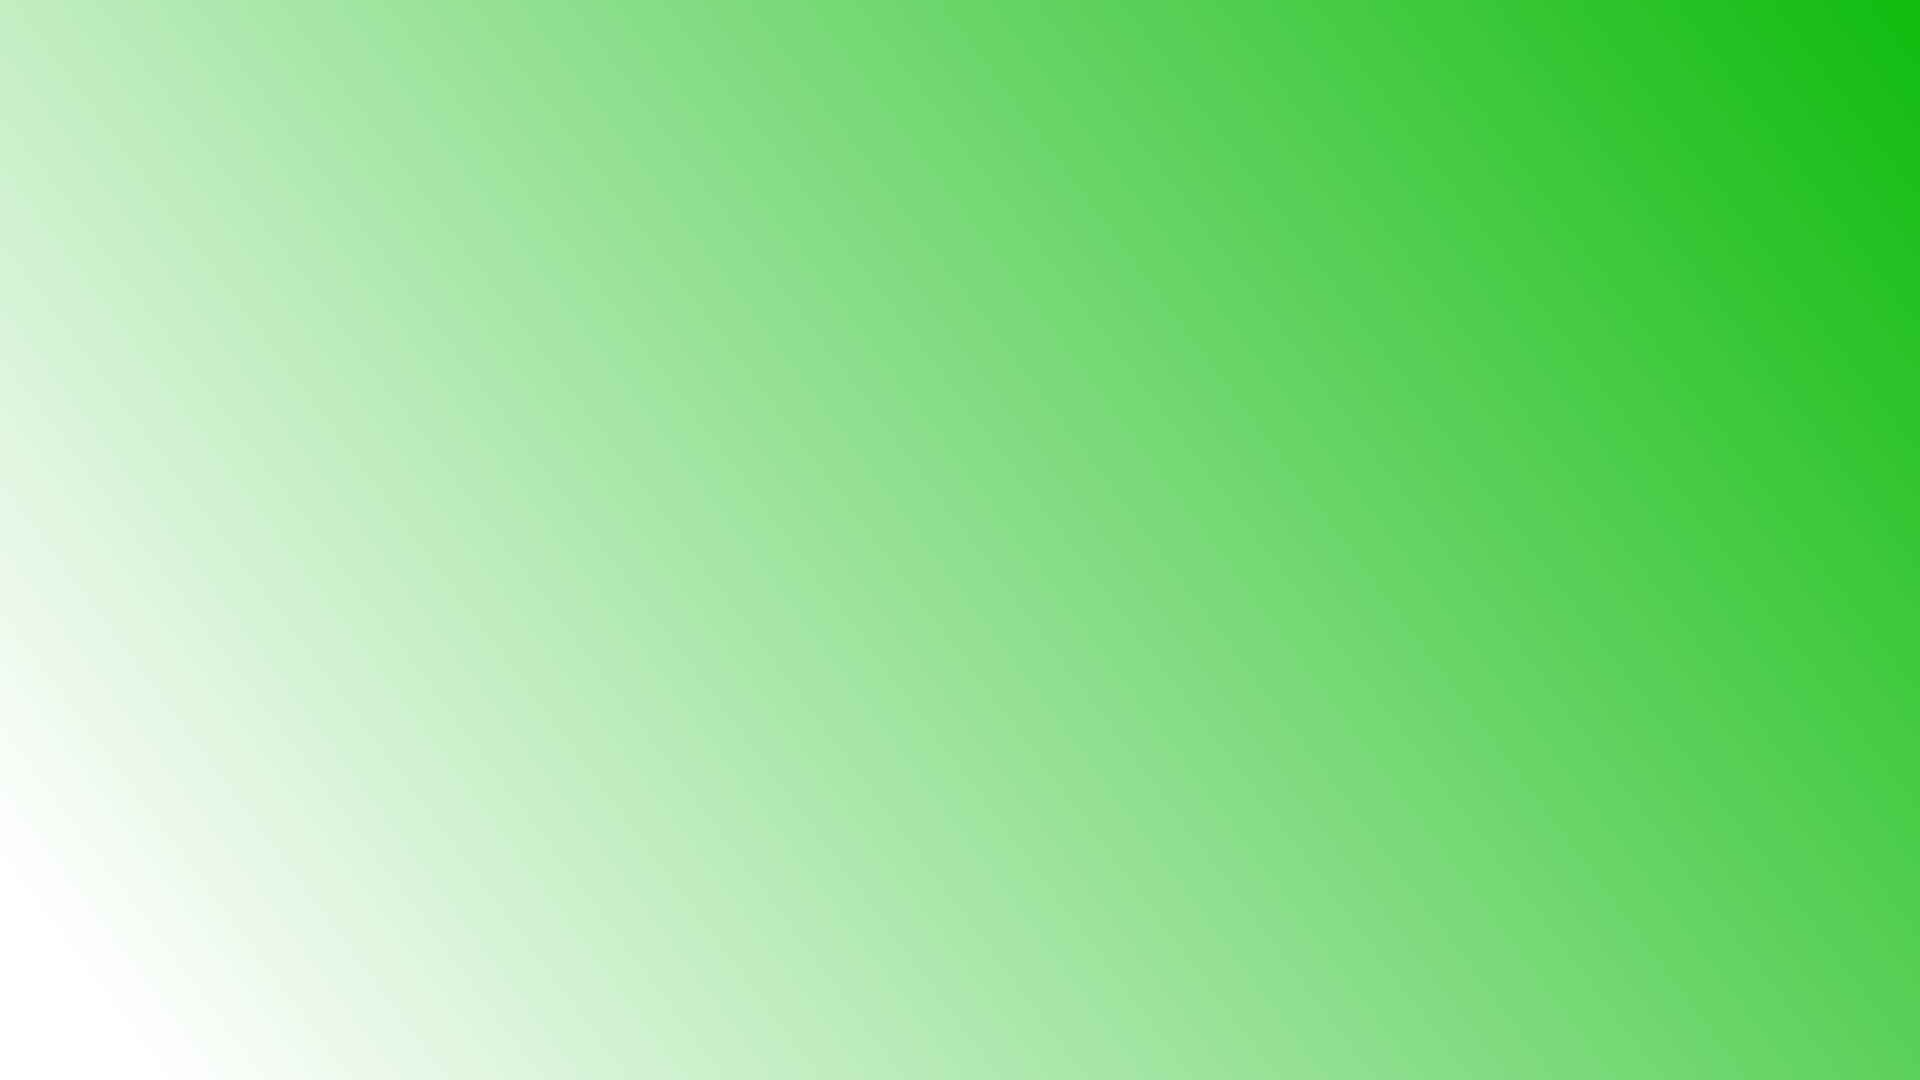 Green and white gradient background